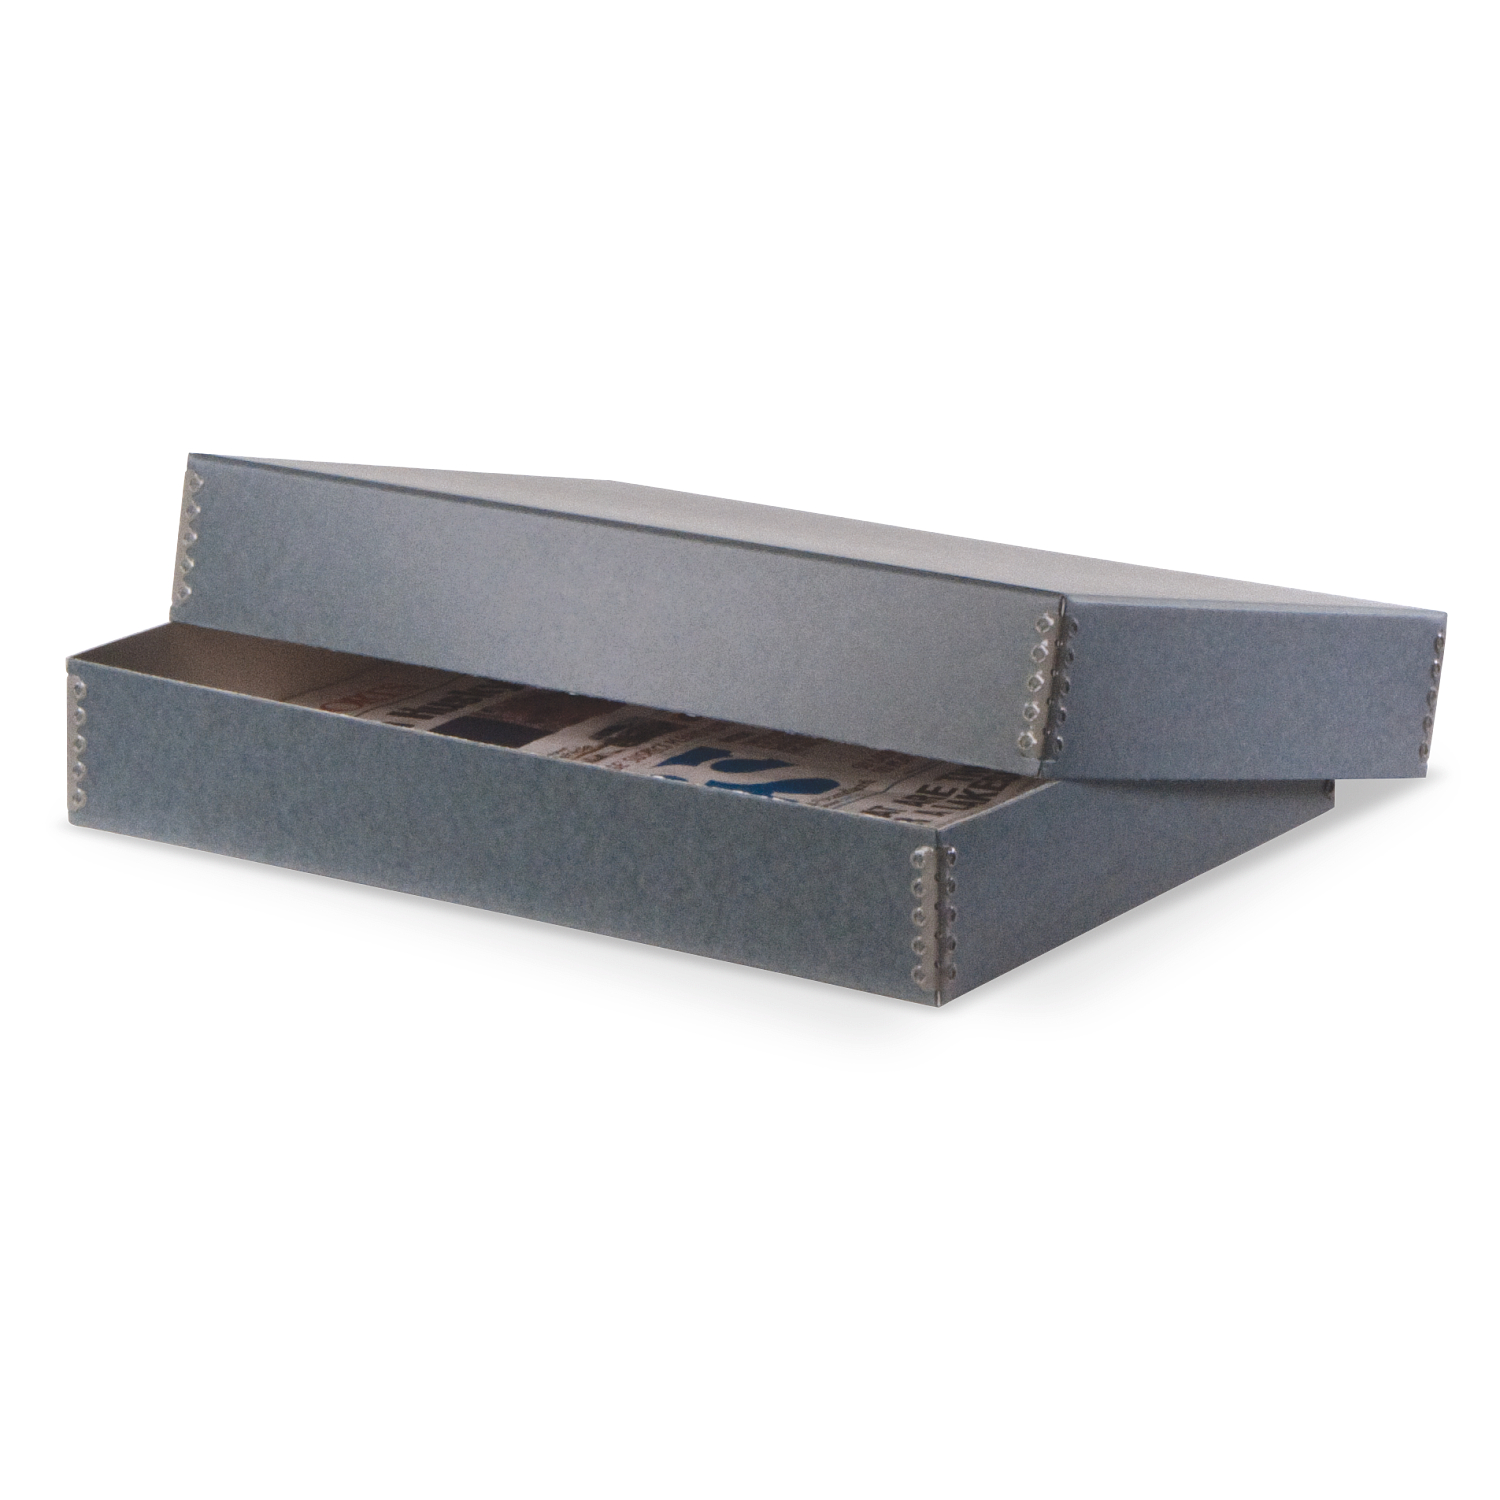 Gaylord Archival® Blue/Grey Drop-Front Newspaper & Oversize Print Box, Archival Storage Boxes, Preservation